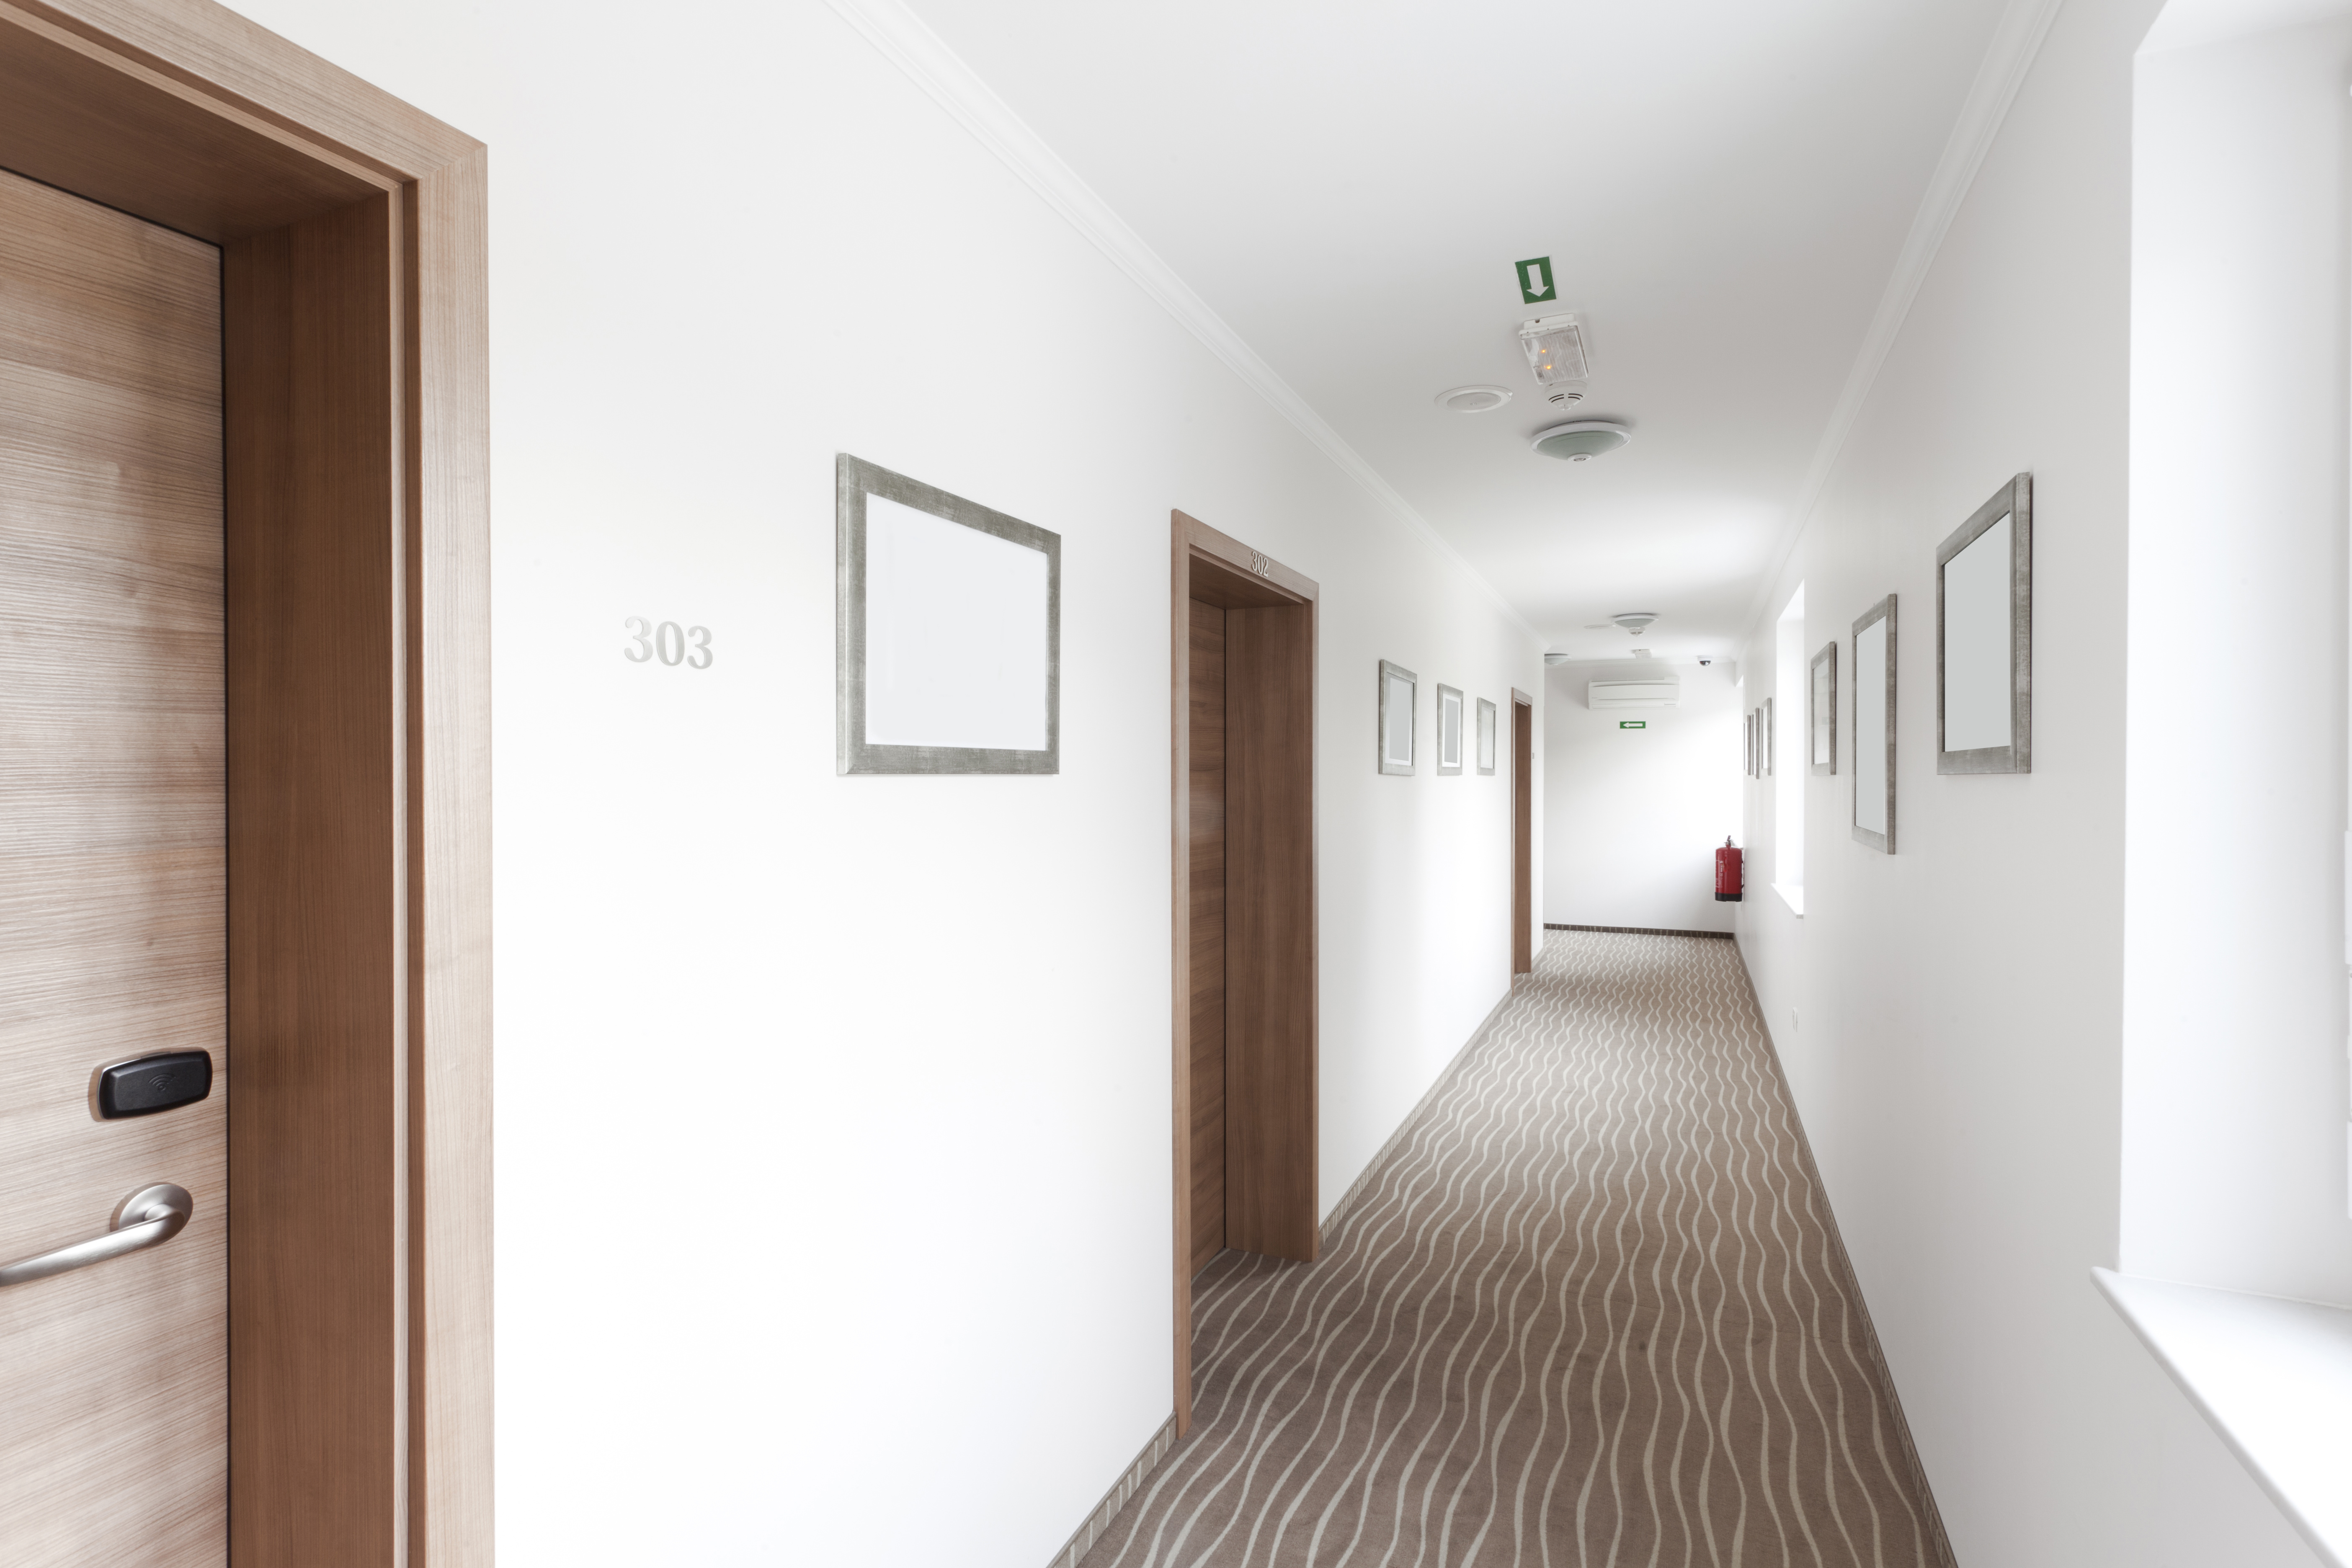 A corridor in a small hotel, with 2 doors to rooms and some pictures on the walls.